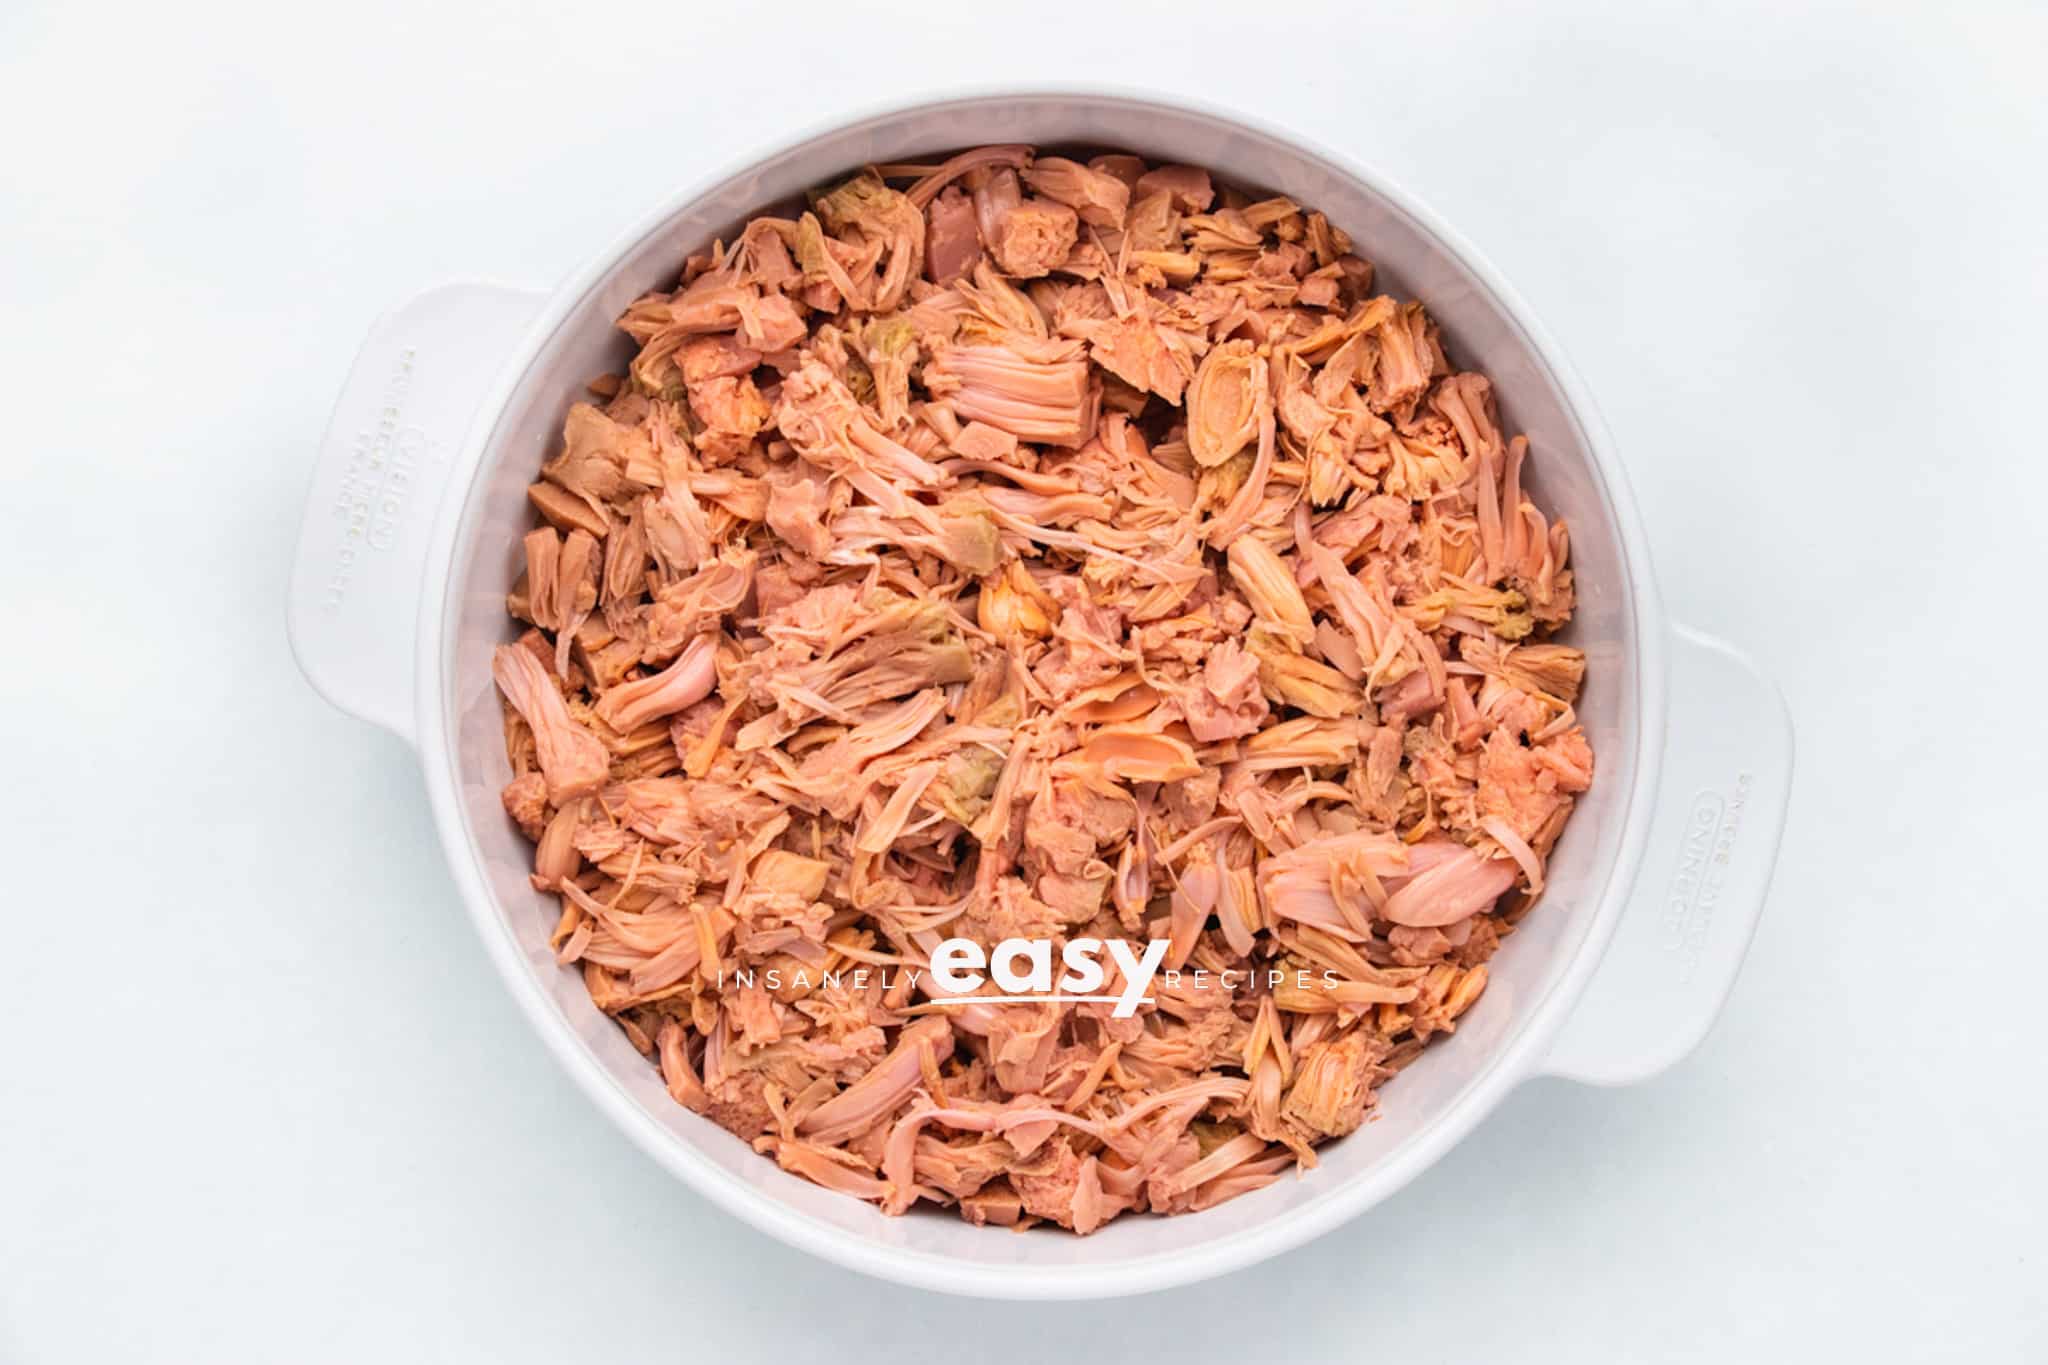 Photo of canned jackfruit that has been shredded, in a shallow white backing dip.